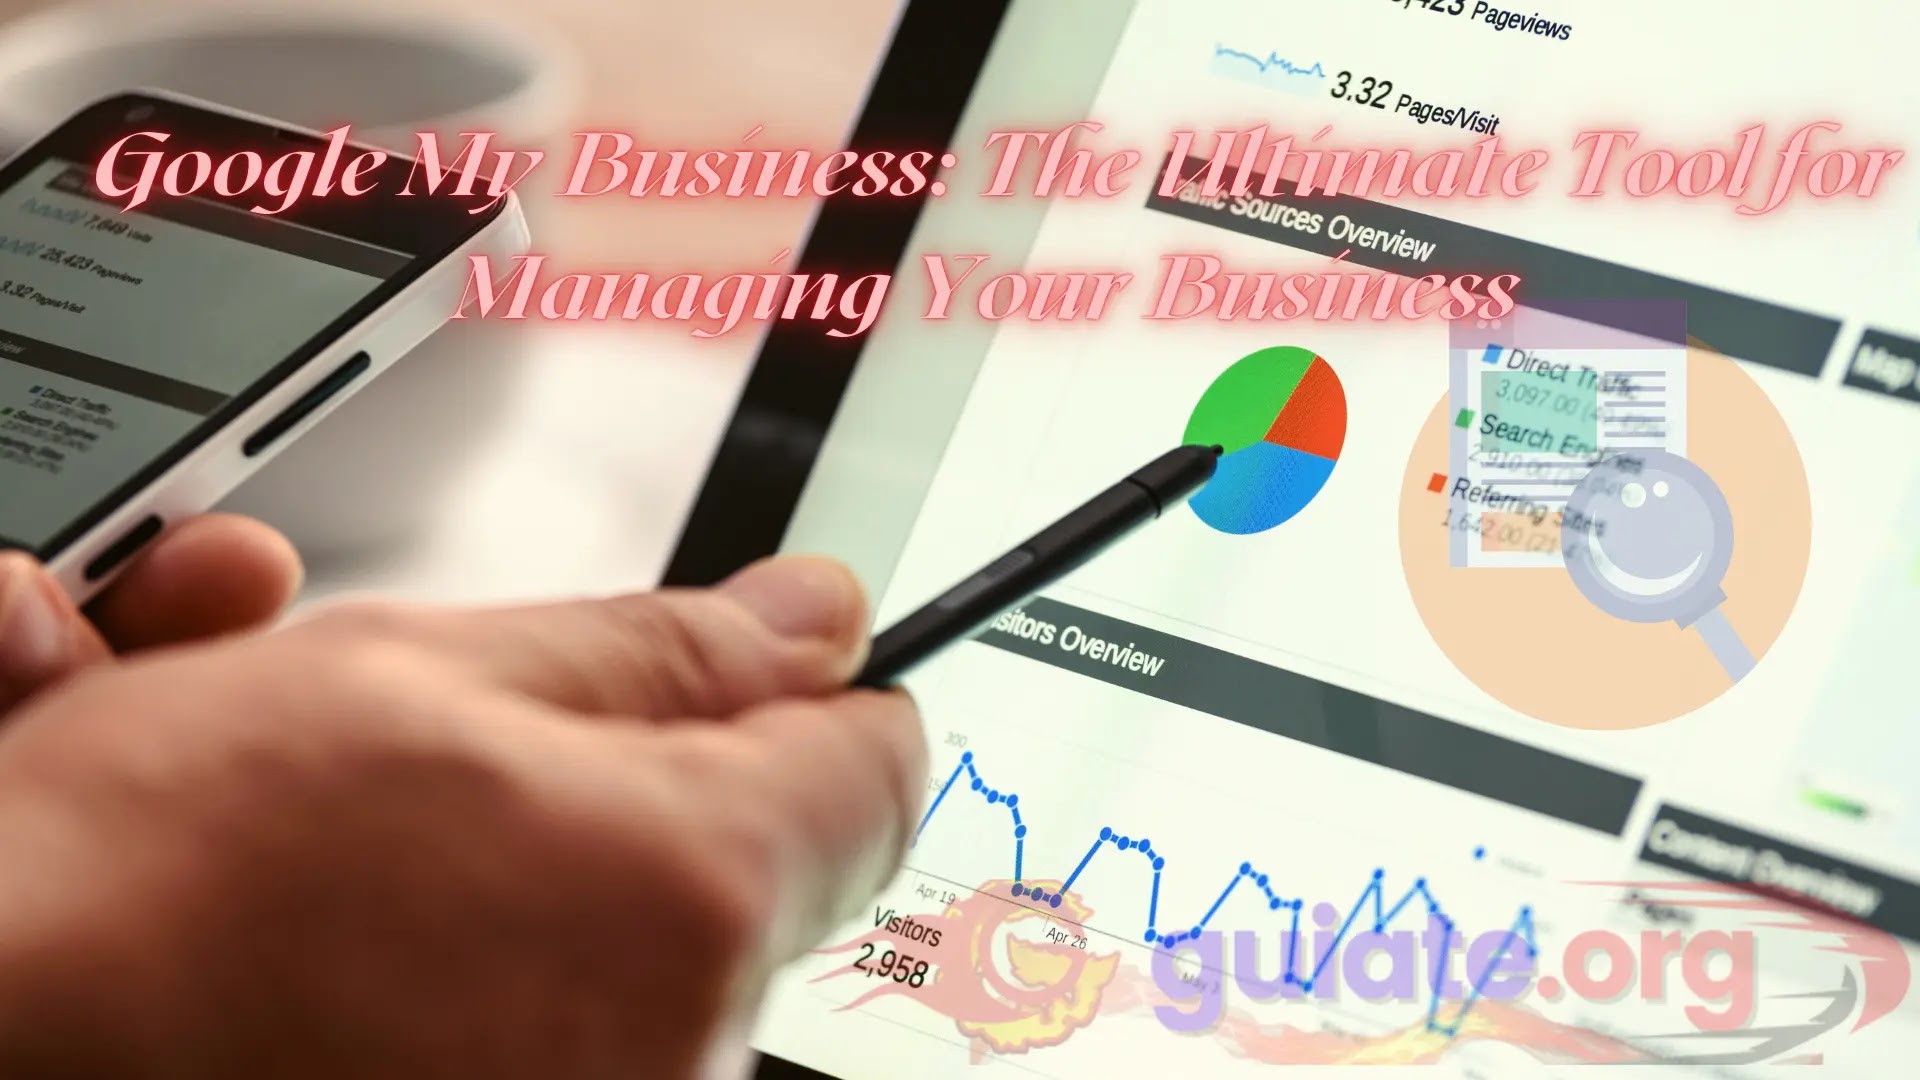 Google My Business: The Ultimate Tool for Managing Your Business